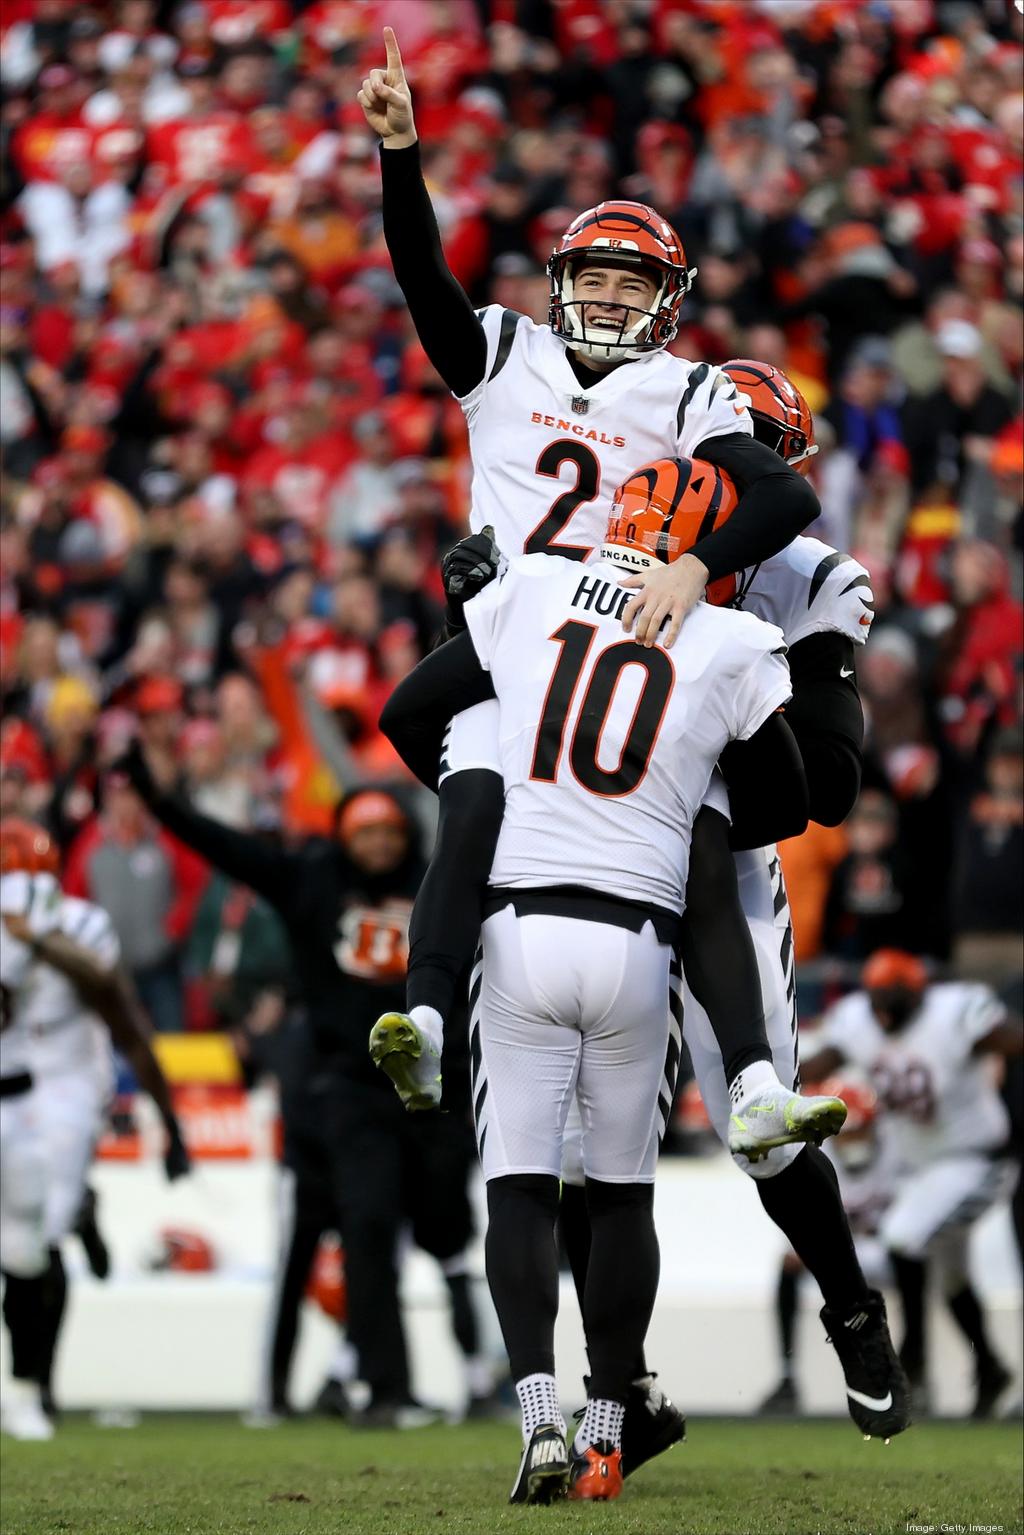 Here's how much Bengals TV ratings soared in AFC Championship game